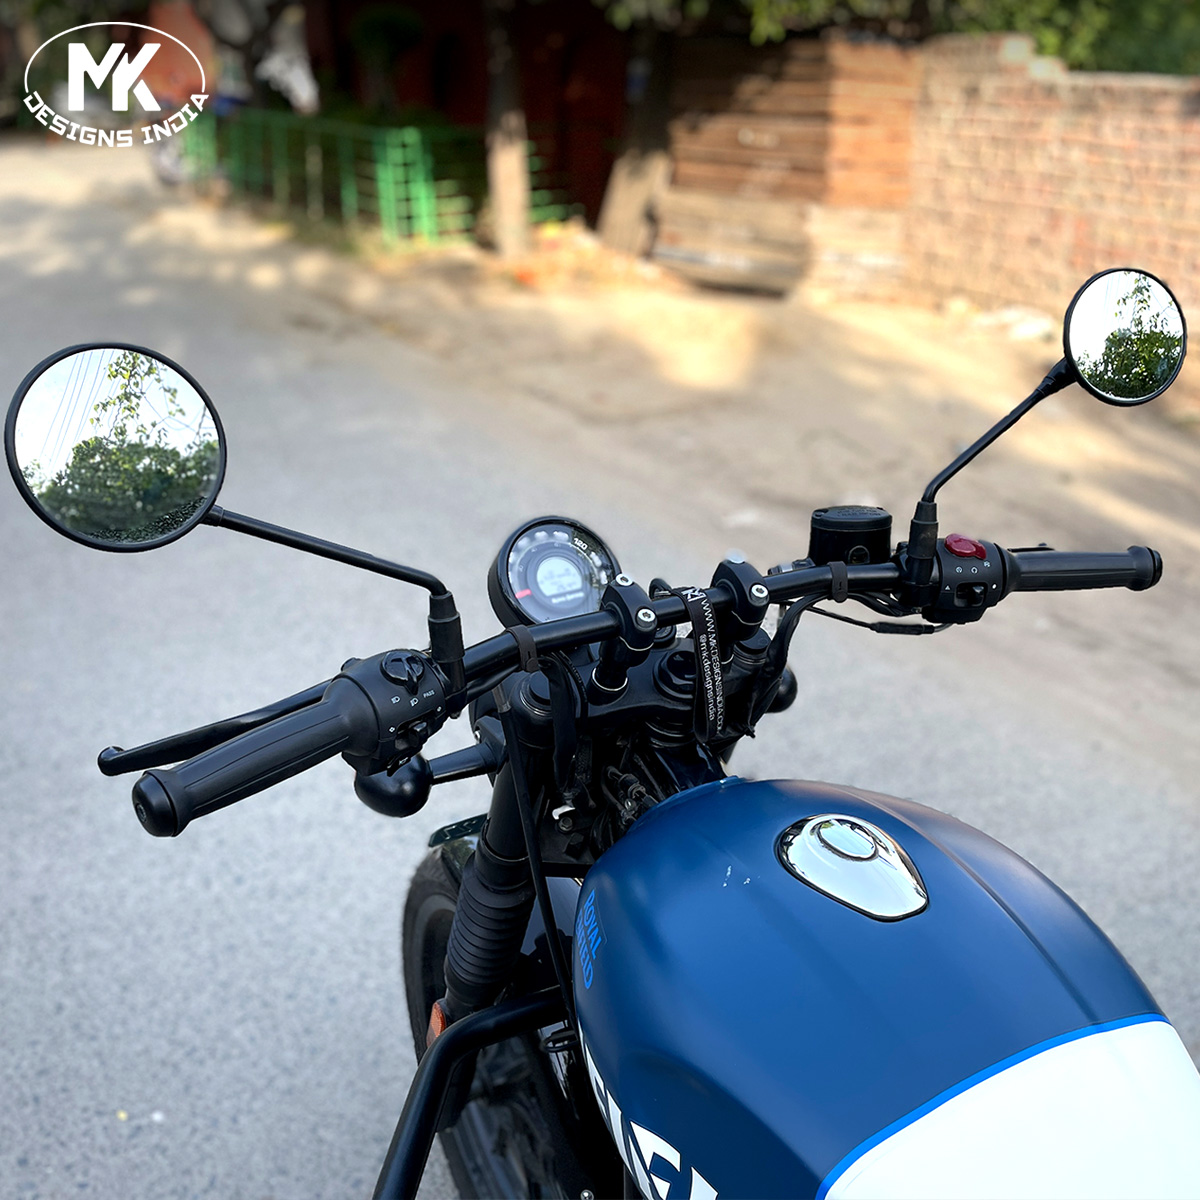 Mk Designs Drag Handle Bar with Risers for Royal Enfield Hunter 350